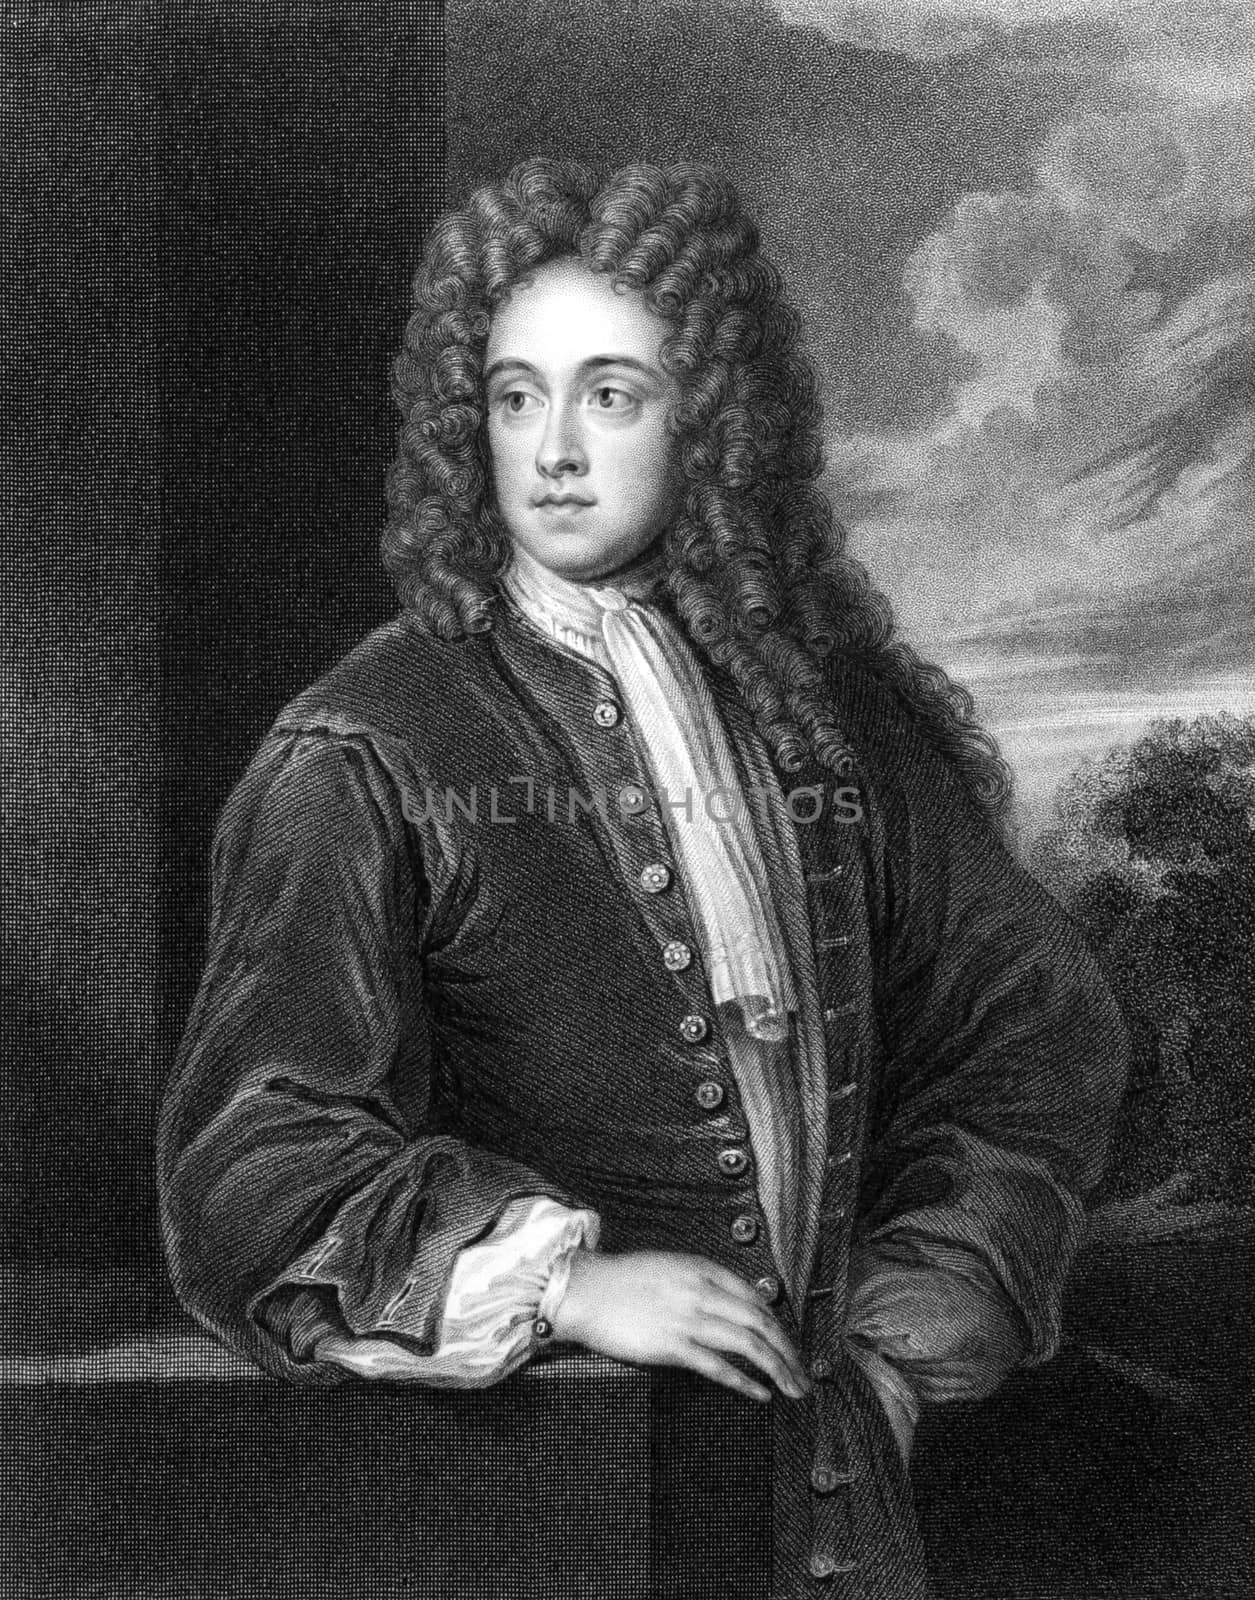 Charles Talbot, 1st Duke of Shrewsbury (1660-1718) on engraving from 1830. English statesman. Engraved by J.Cochran and published in ''Portraits of Illustrious Personages of Great Britain'',UK,1830.